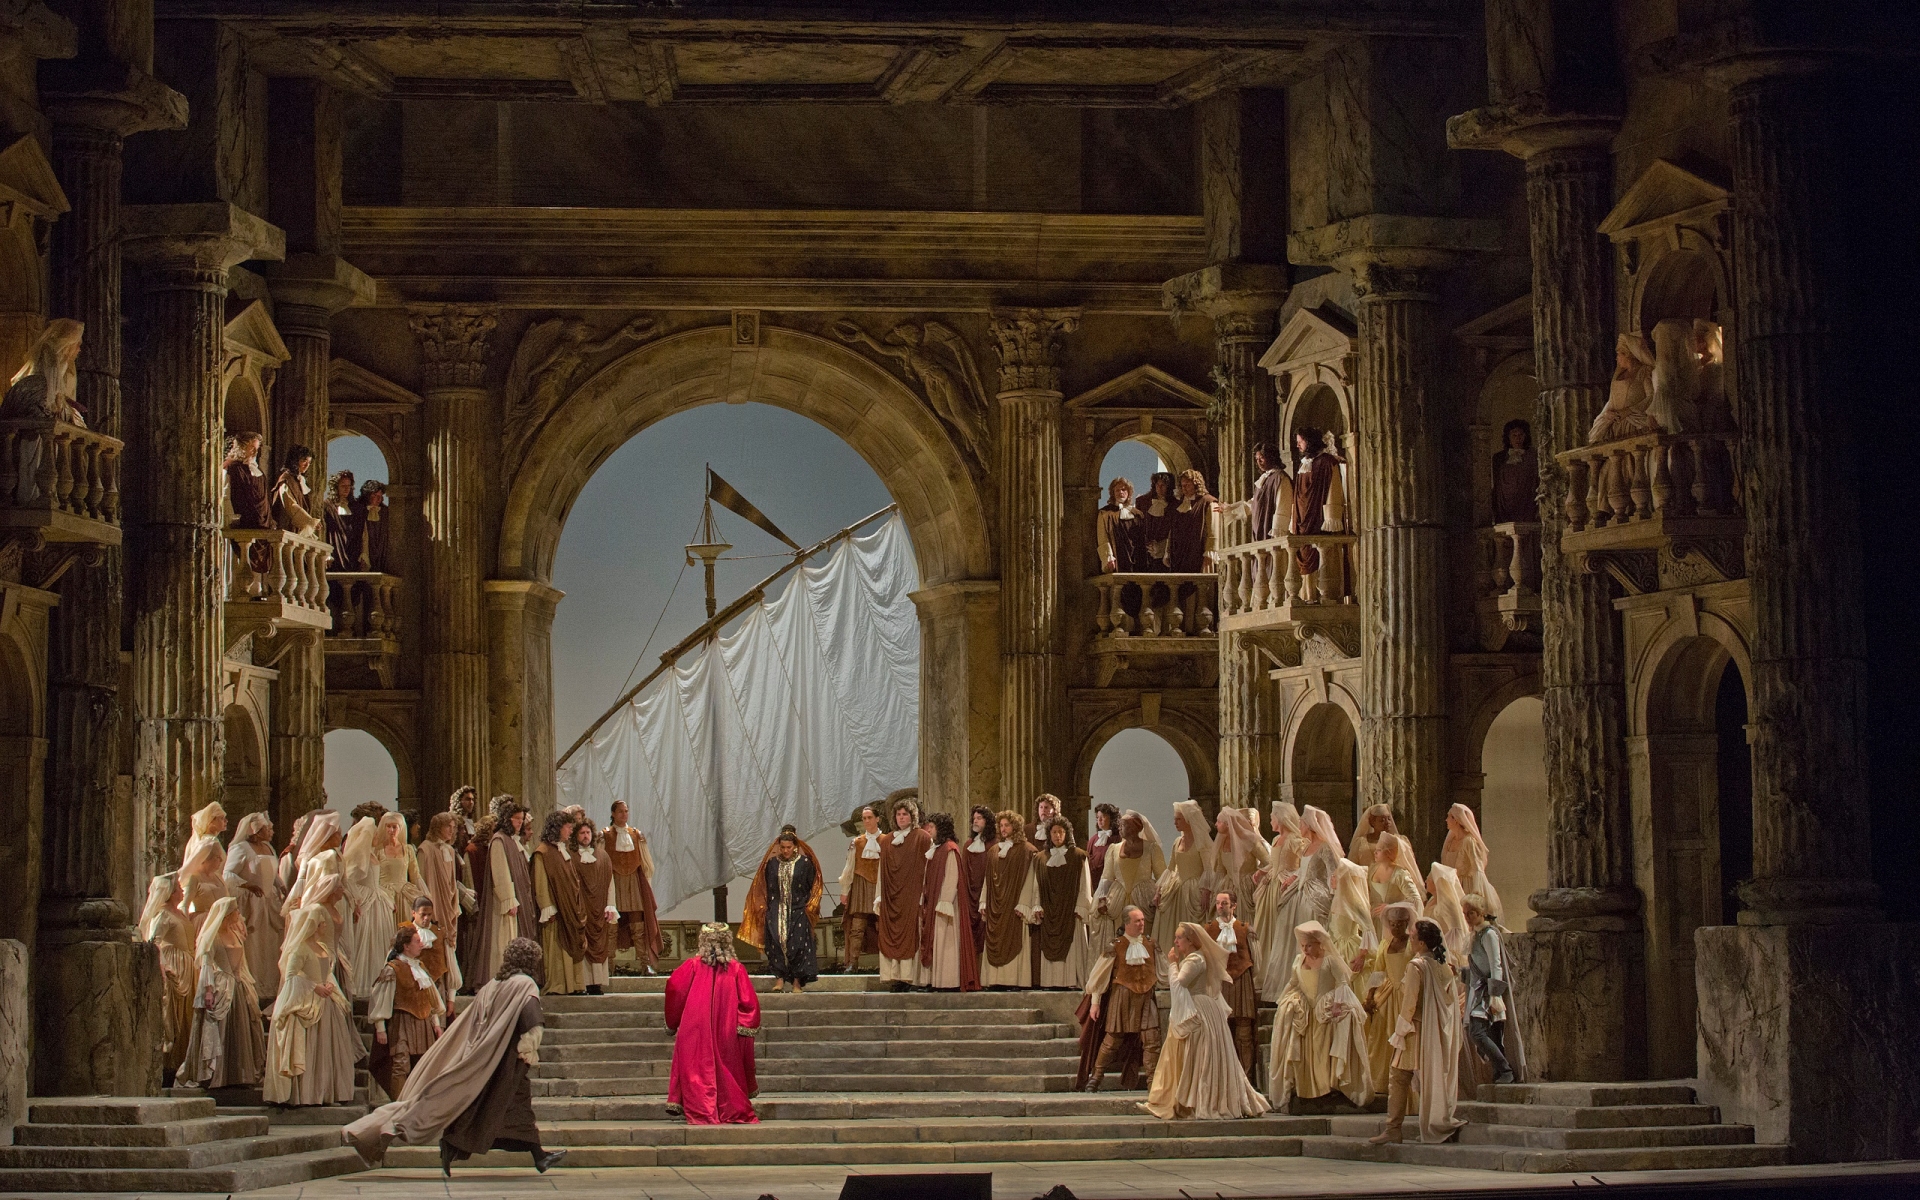 Consider seeing a show at the Metropolitan Opera House